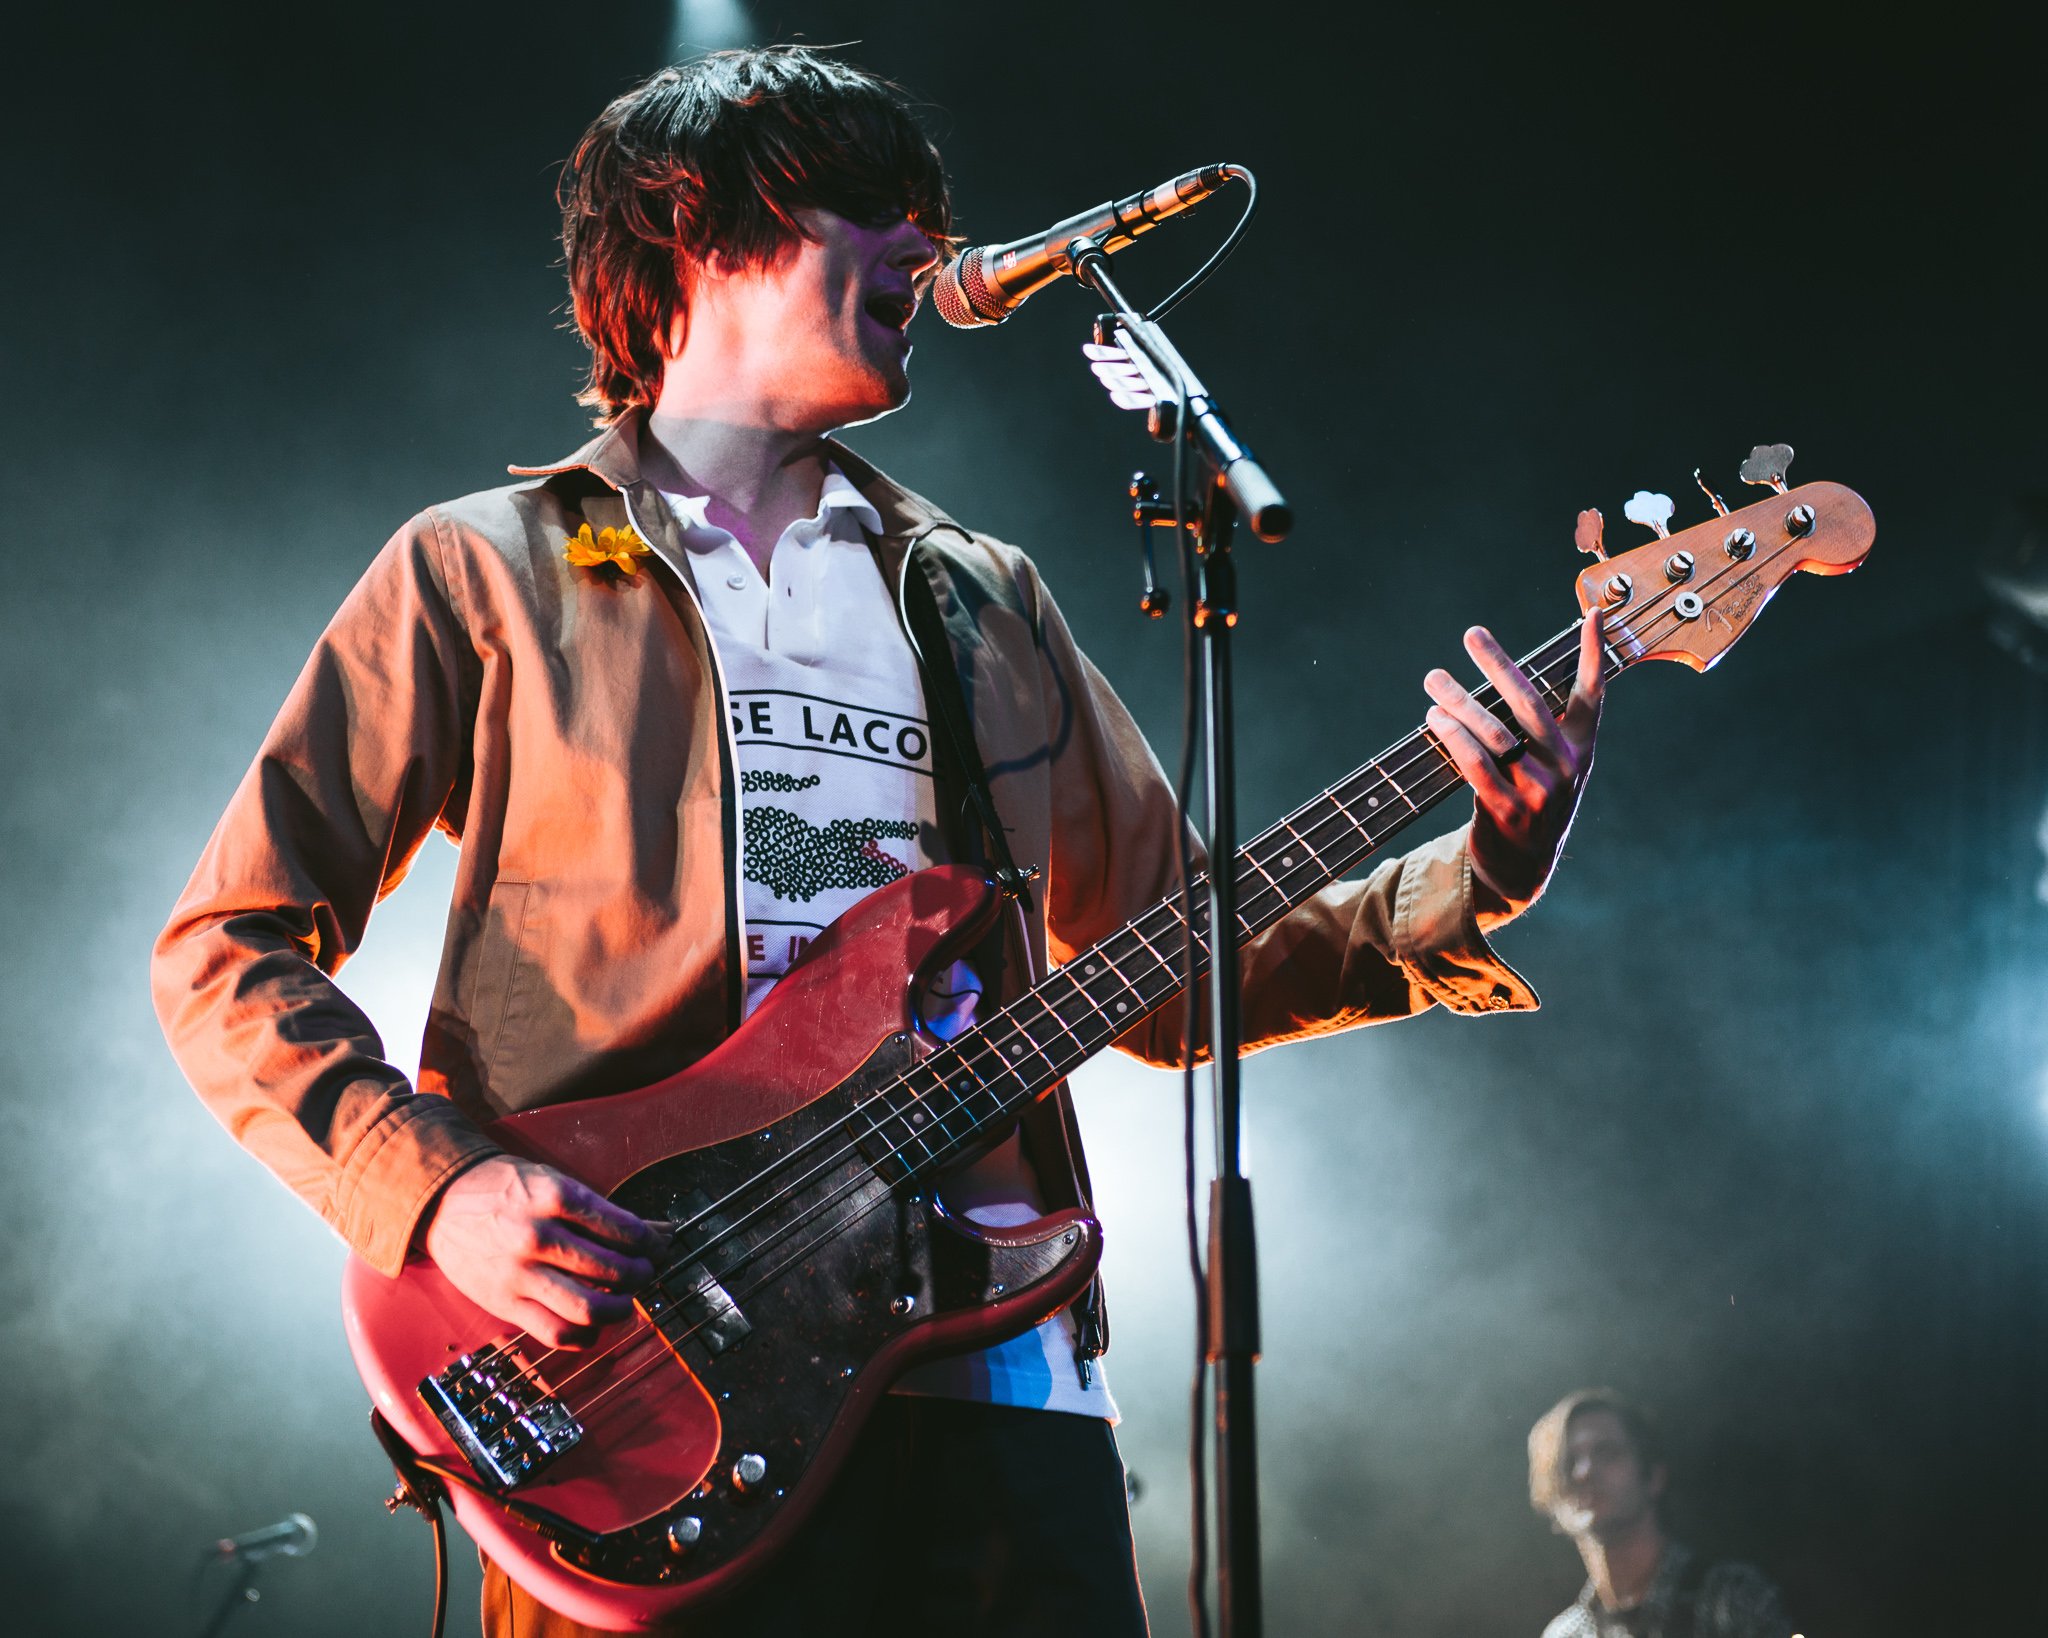  Dallon Weekes rocks out on stage. 